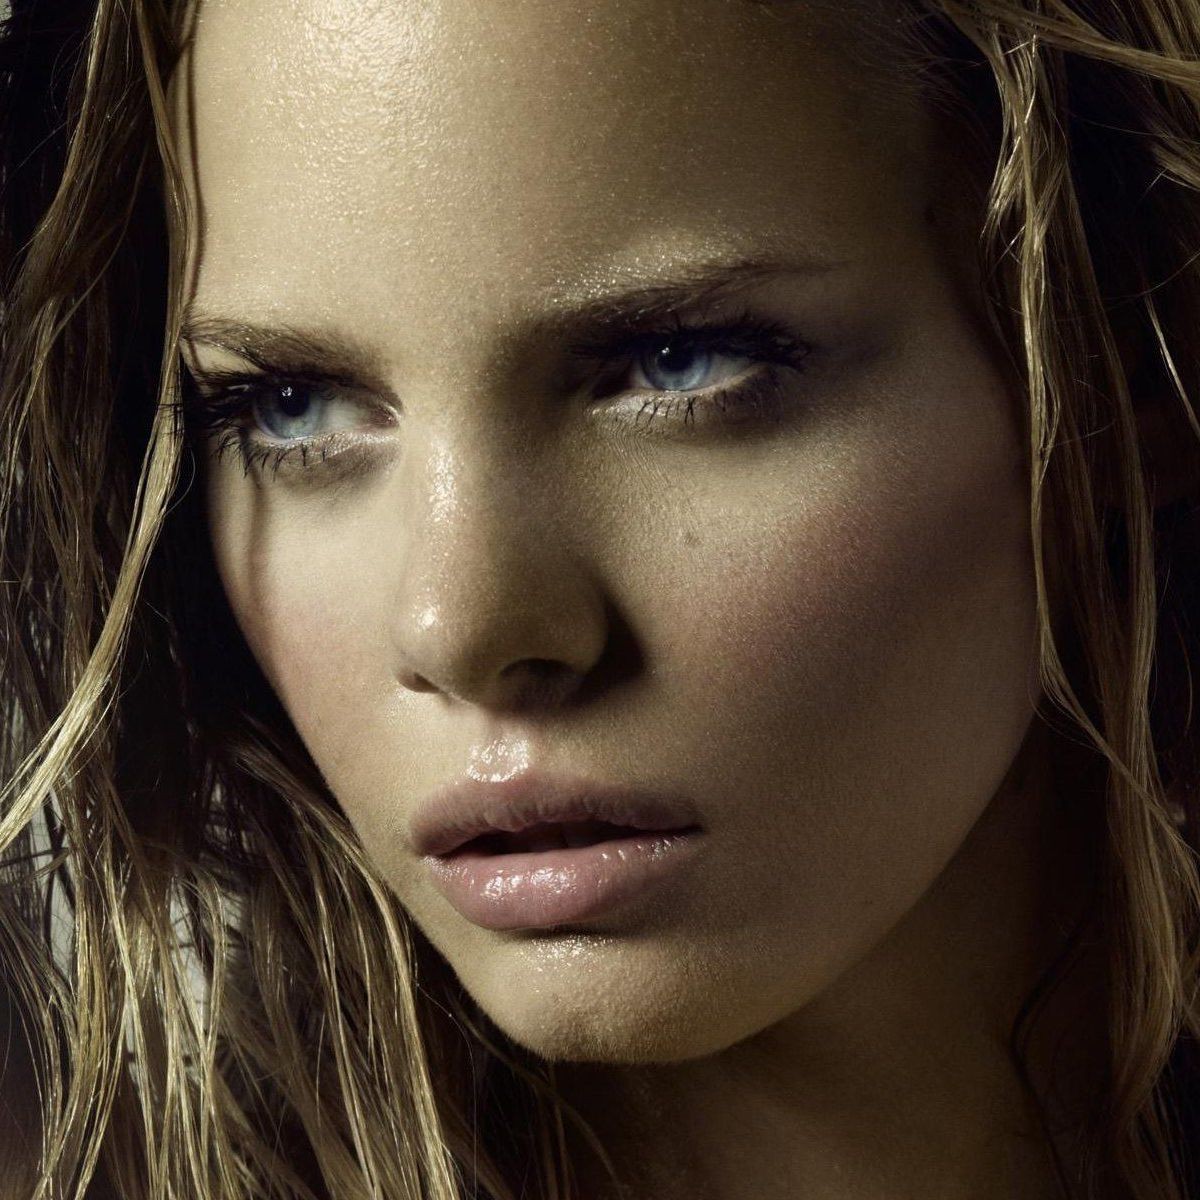 Marloes Horst photo 174 of 570 pics, wallpaper - photo #353402 - ThePlace2